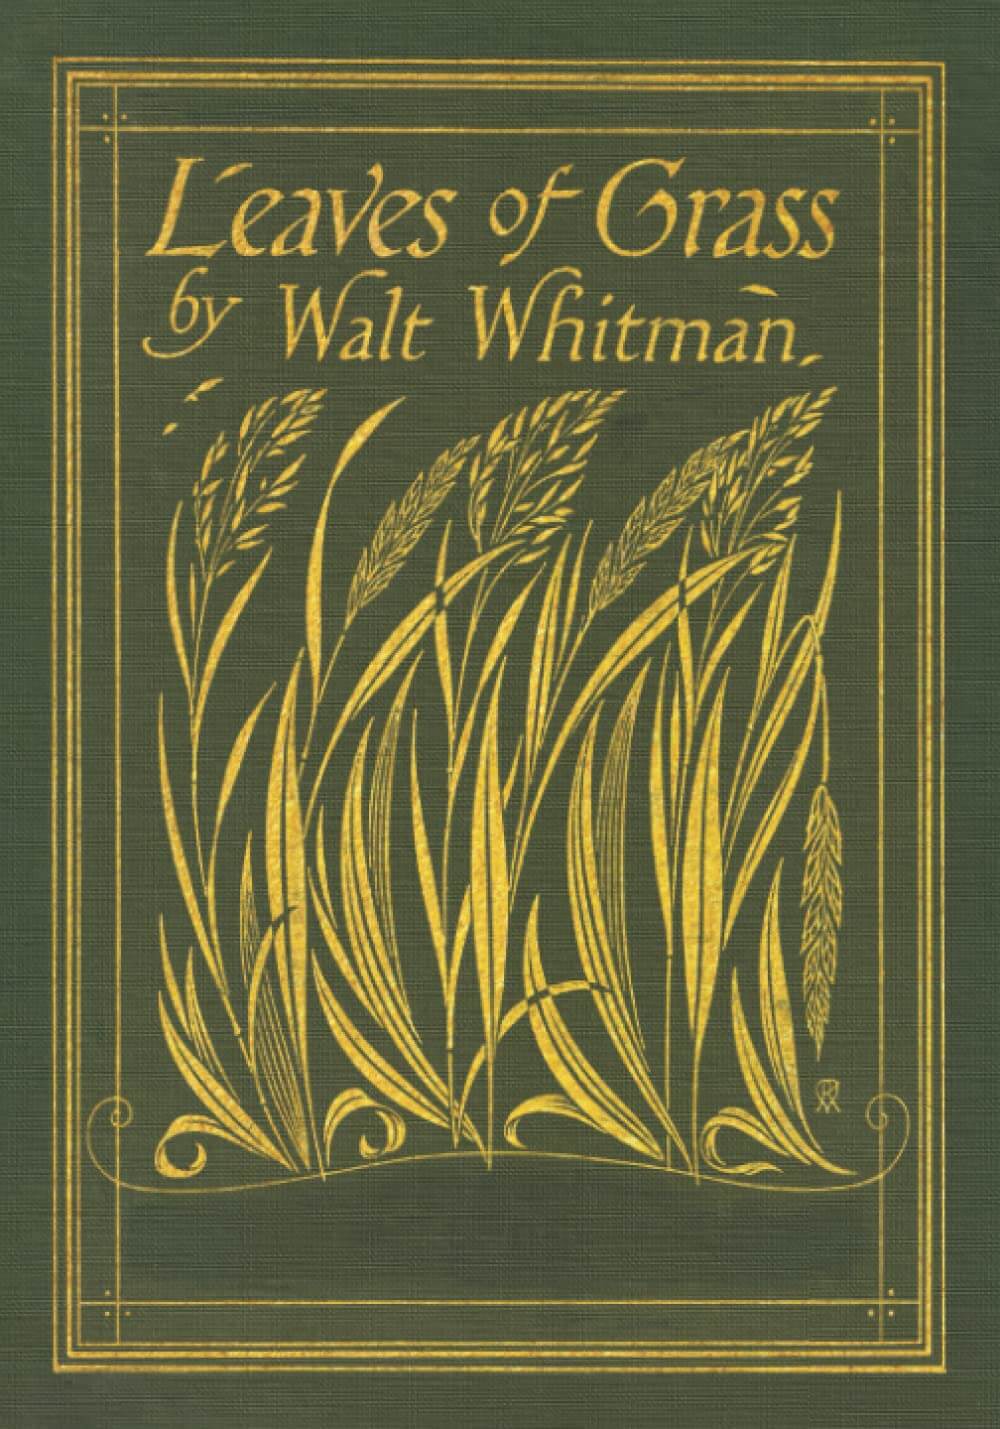 “Leaves of Grass” by Walt Whitman